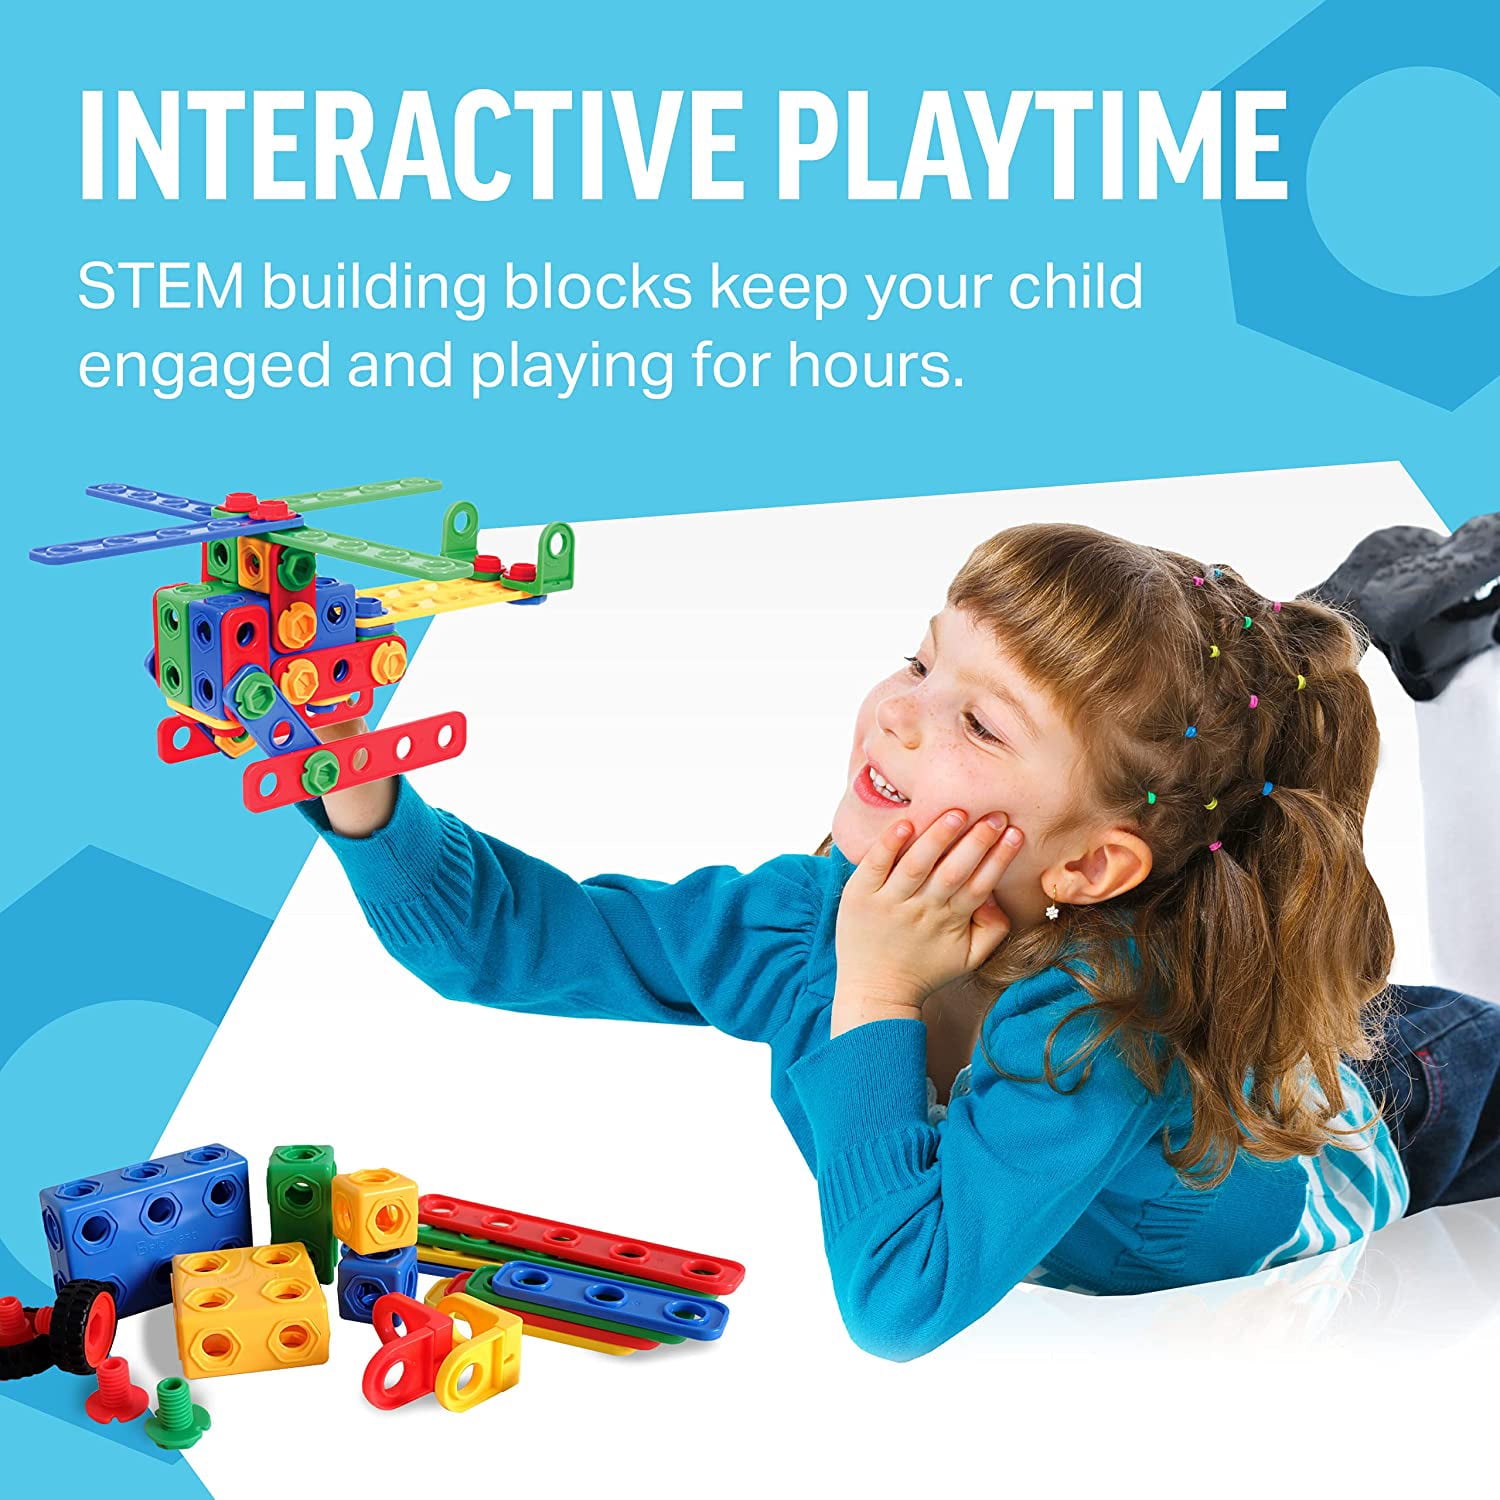 Brickyard Building Blocks STEM Toys & Activities - Educational Building Toys with 163 Pieces, Kid-Friendly Tools, Design Guide and Toy Storage Box